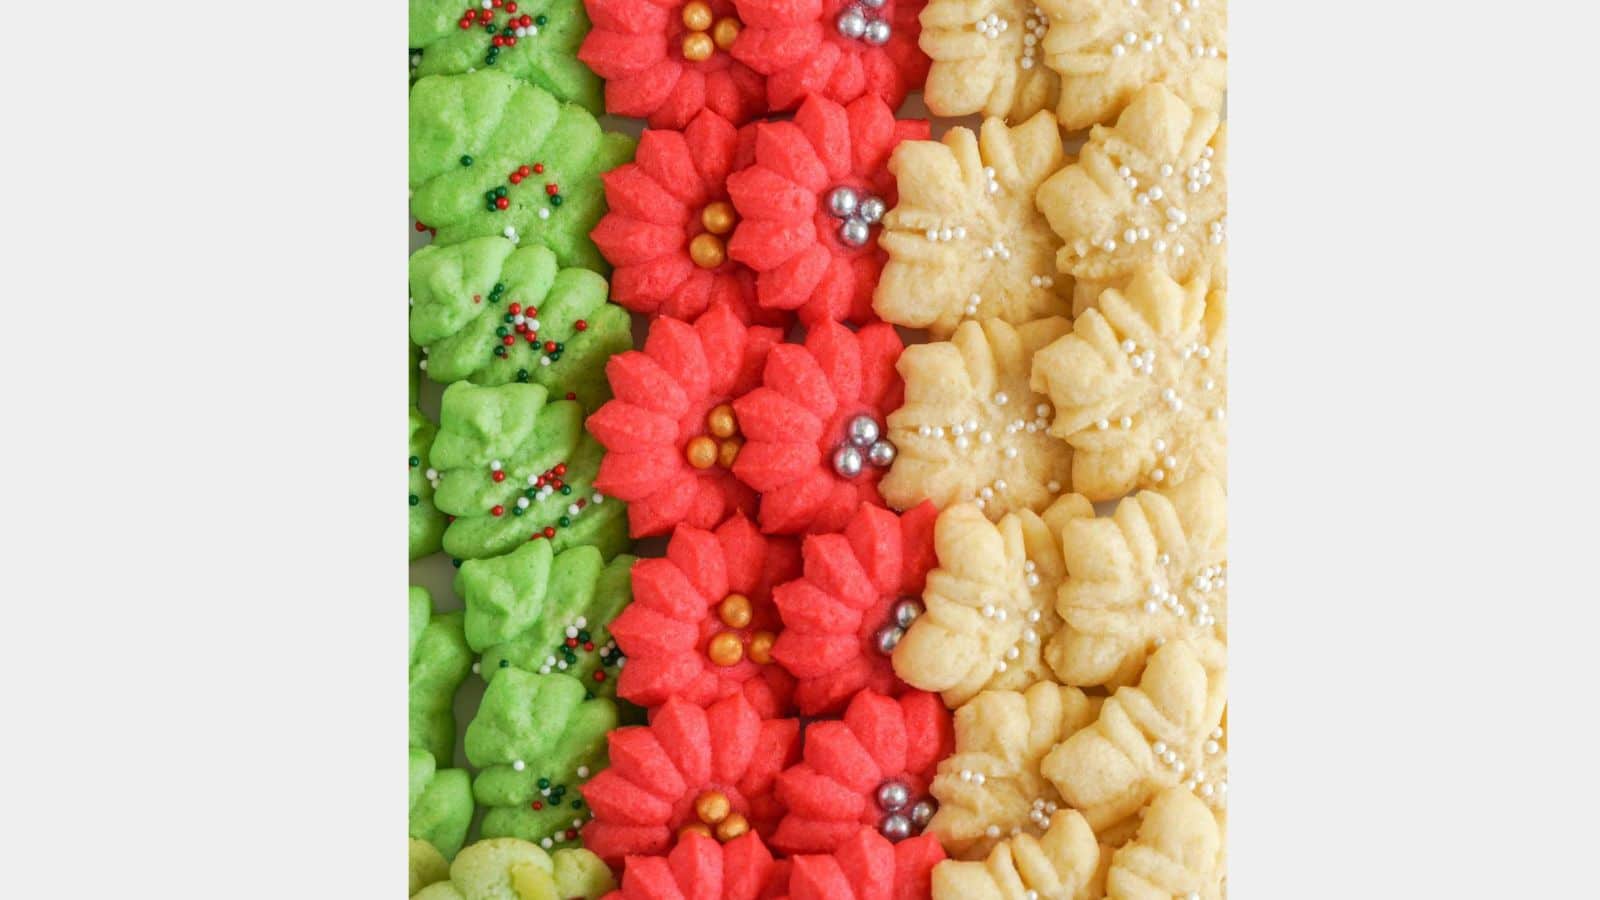 christmas cookies on a plate